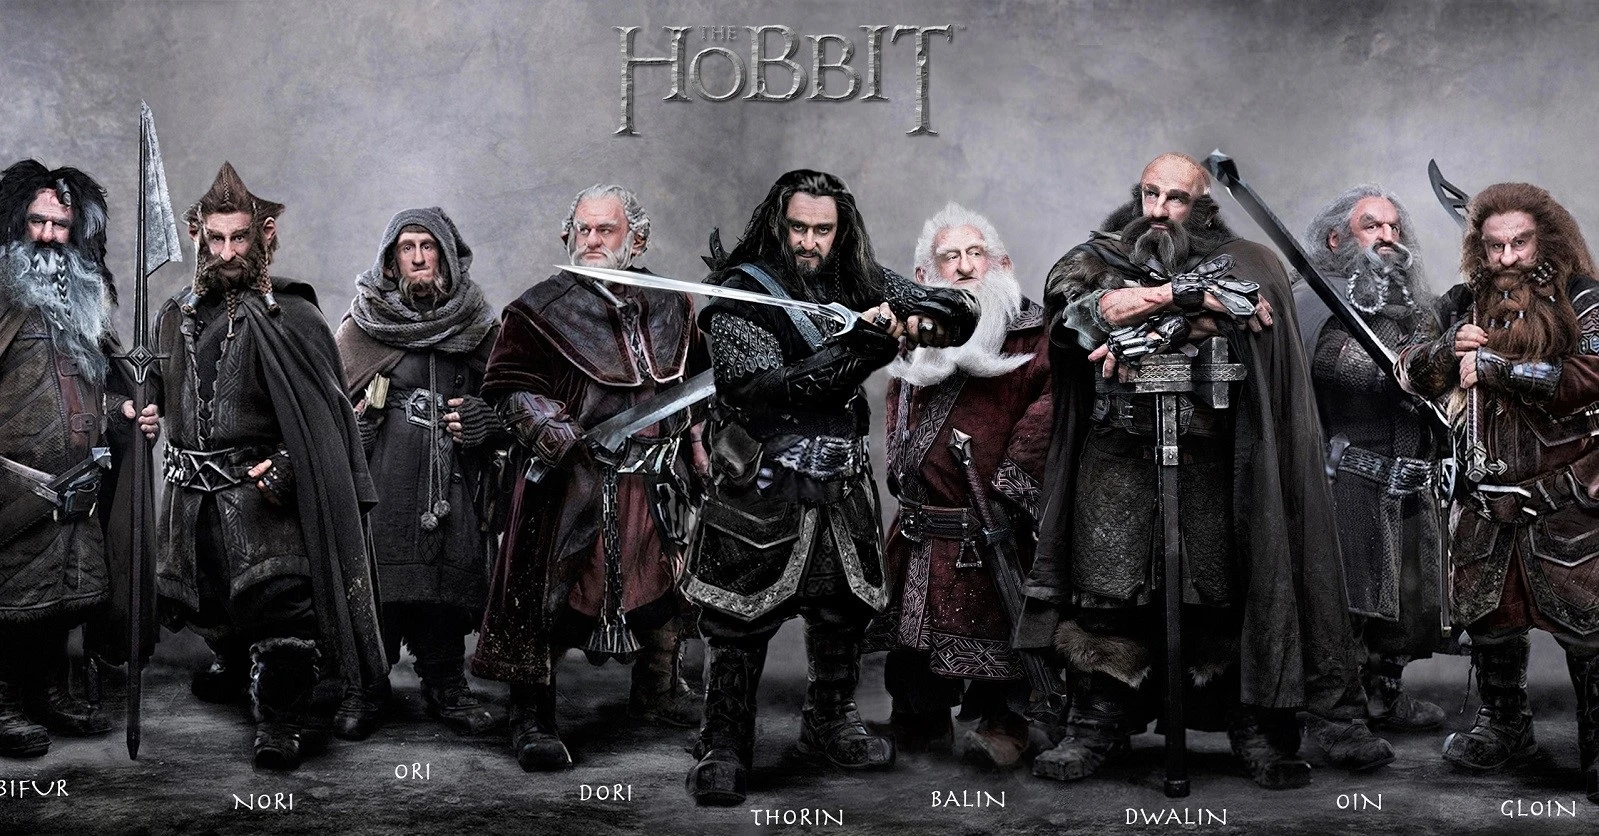 13 Dwarves of Thorin's Company from The Hobbit